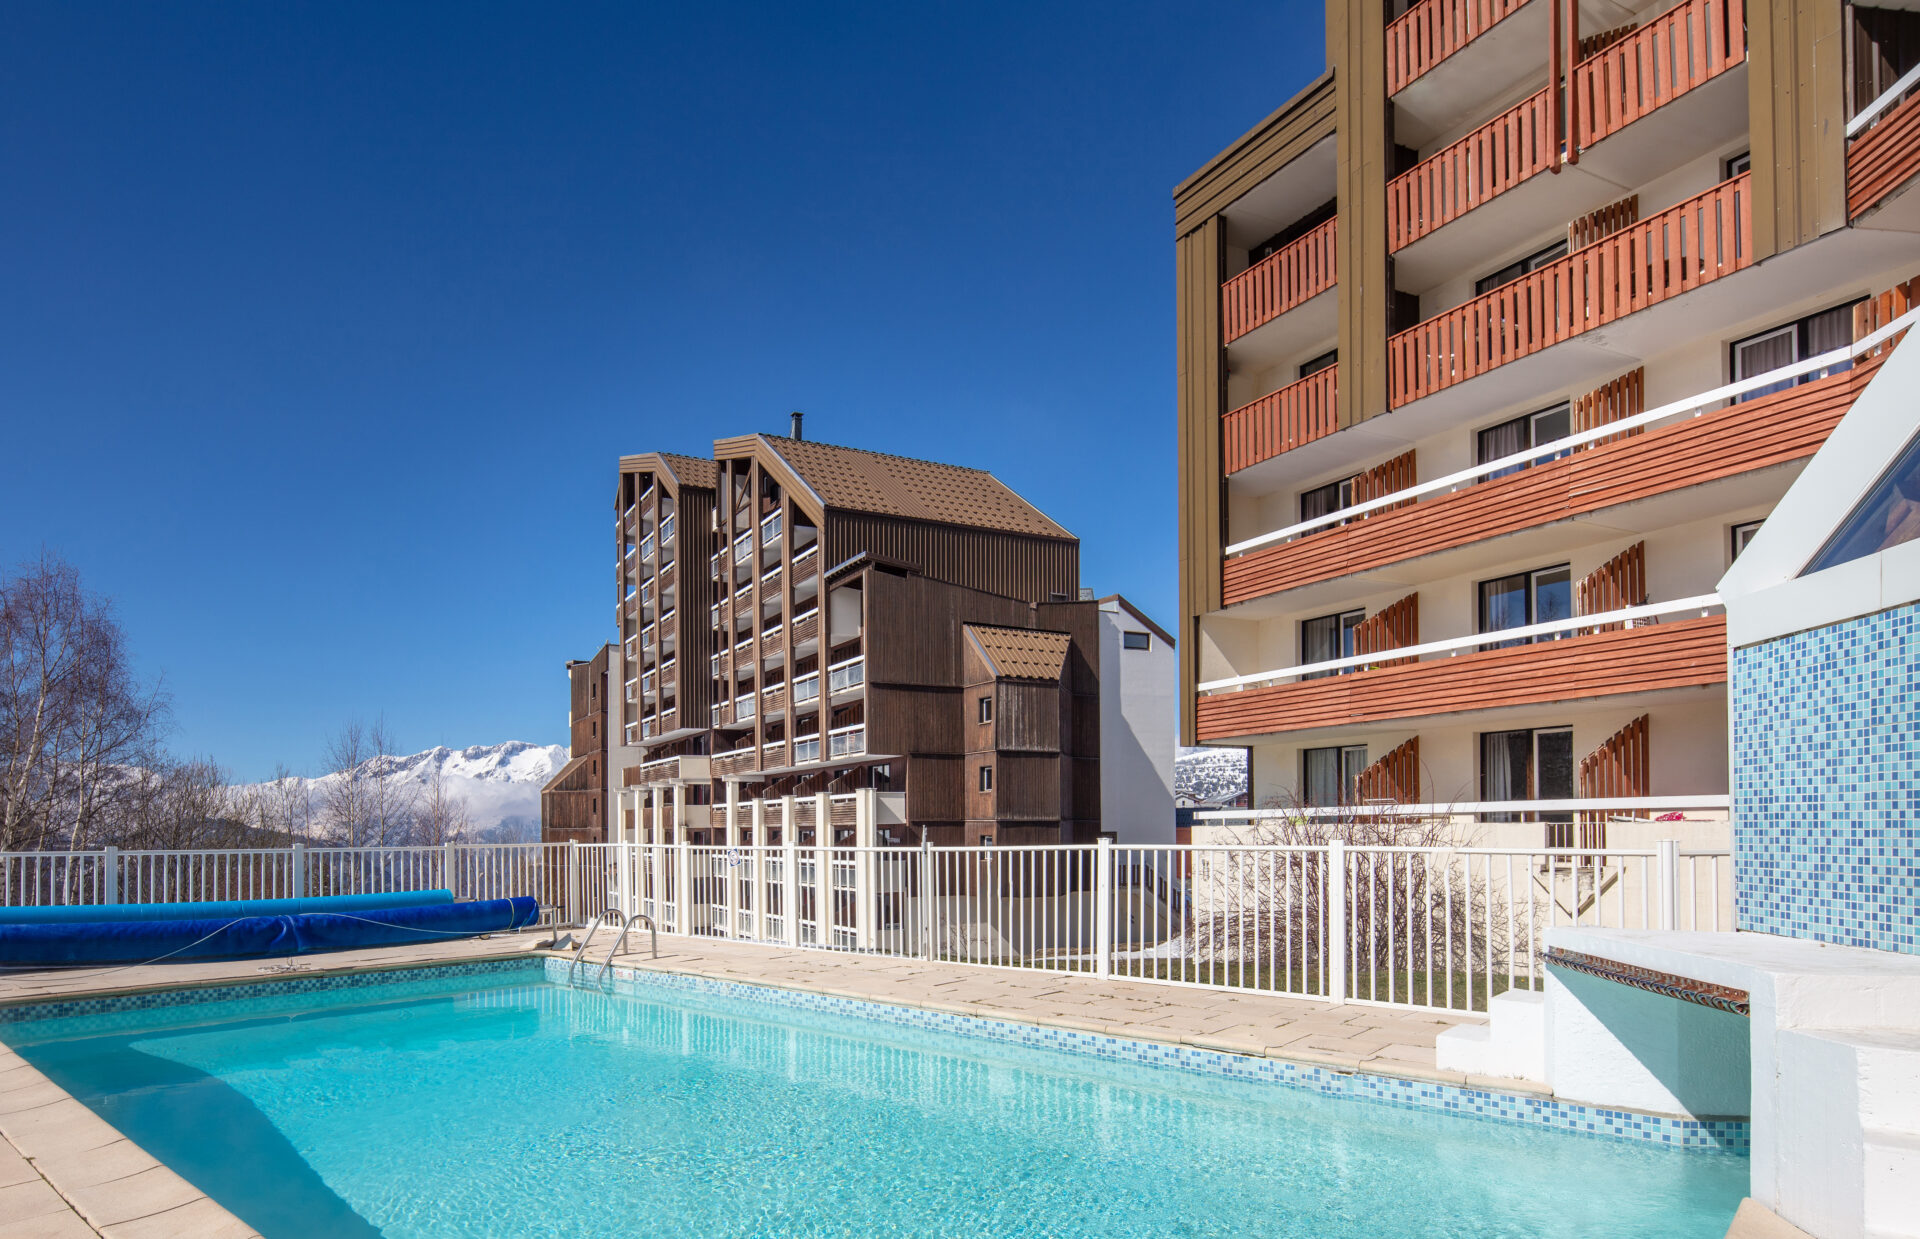 An image of the pool at Les Bergers - Alpe d'Huez